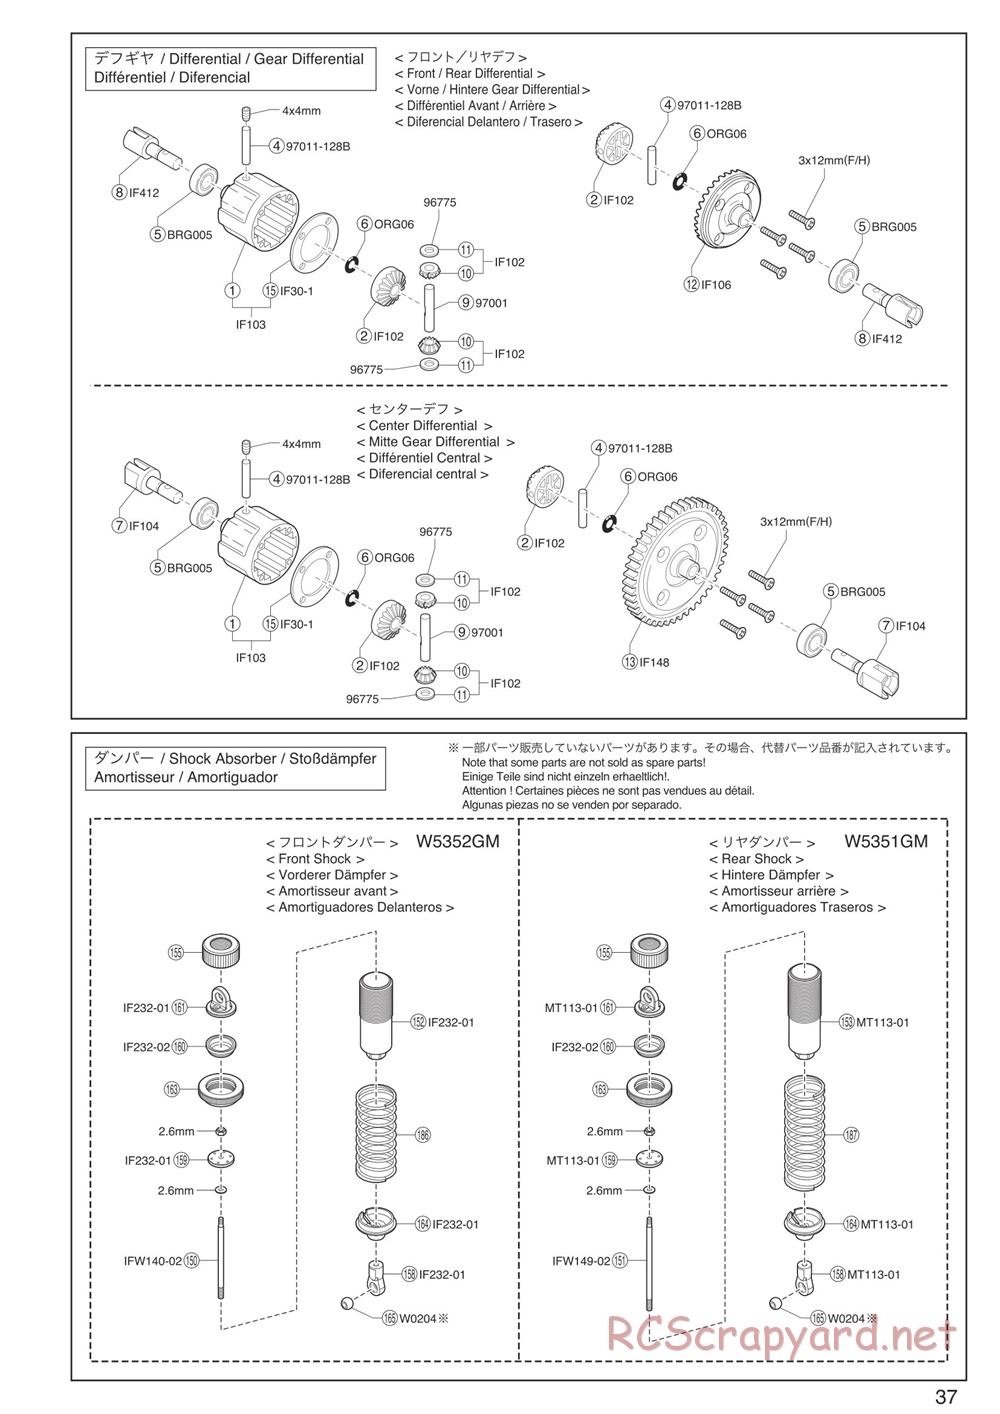 Kyosho - Inferno Neo 3.0 - Exploded Views - Page 6